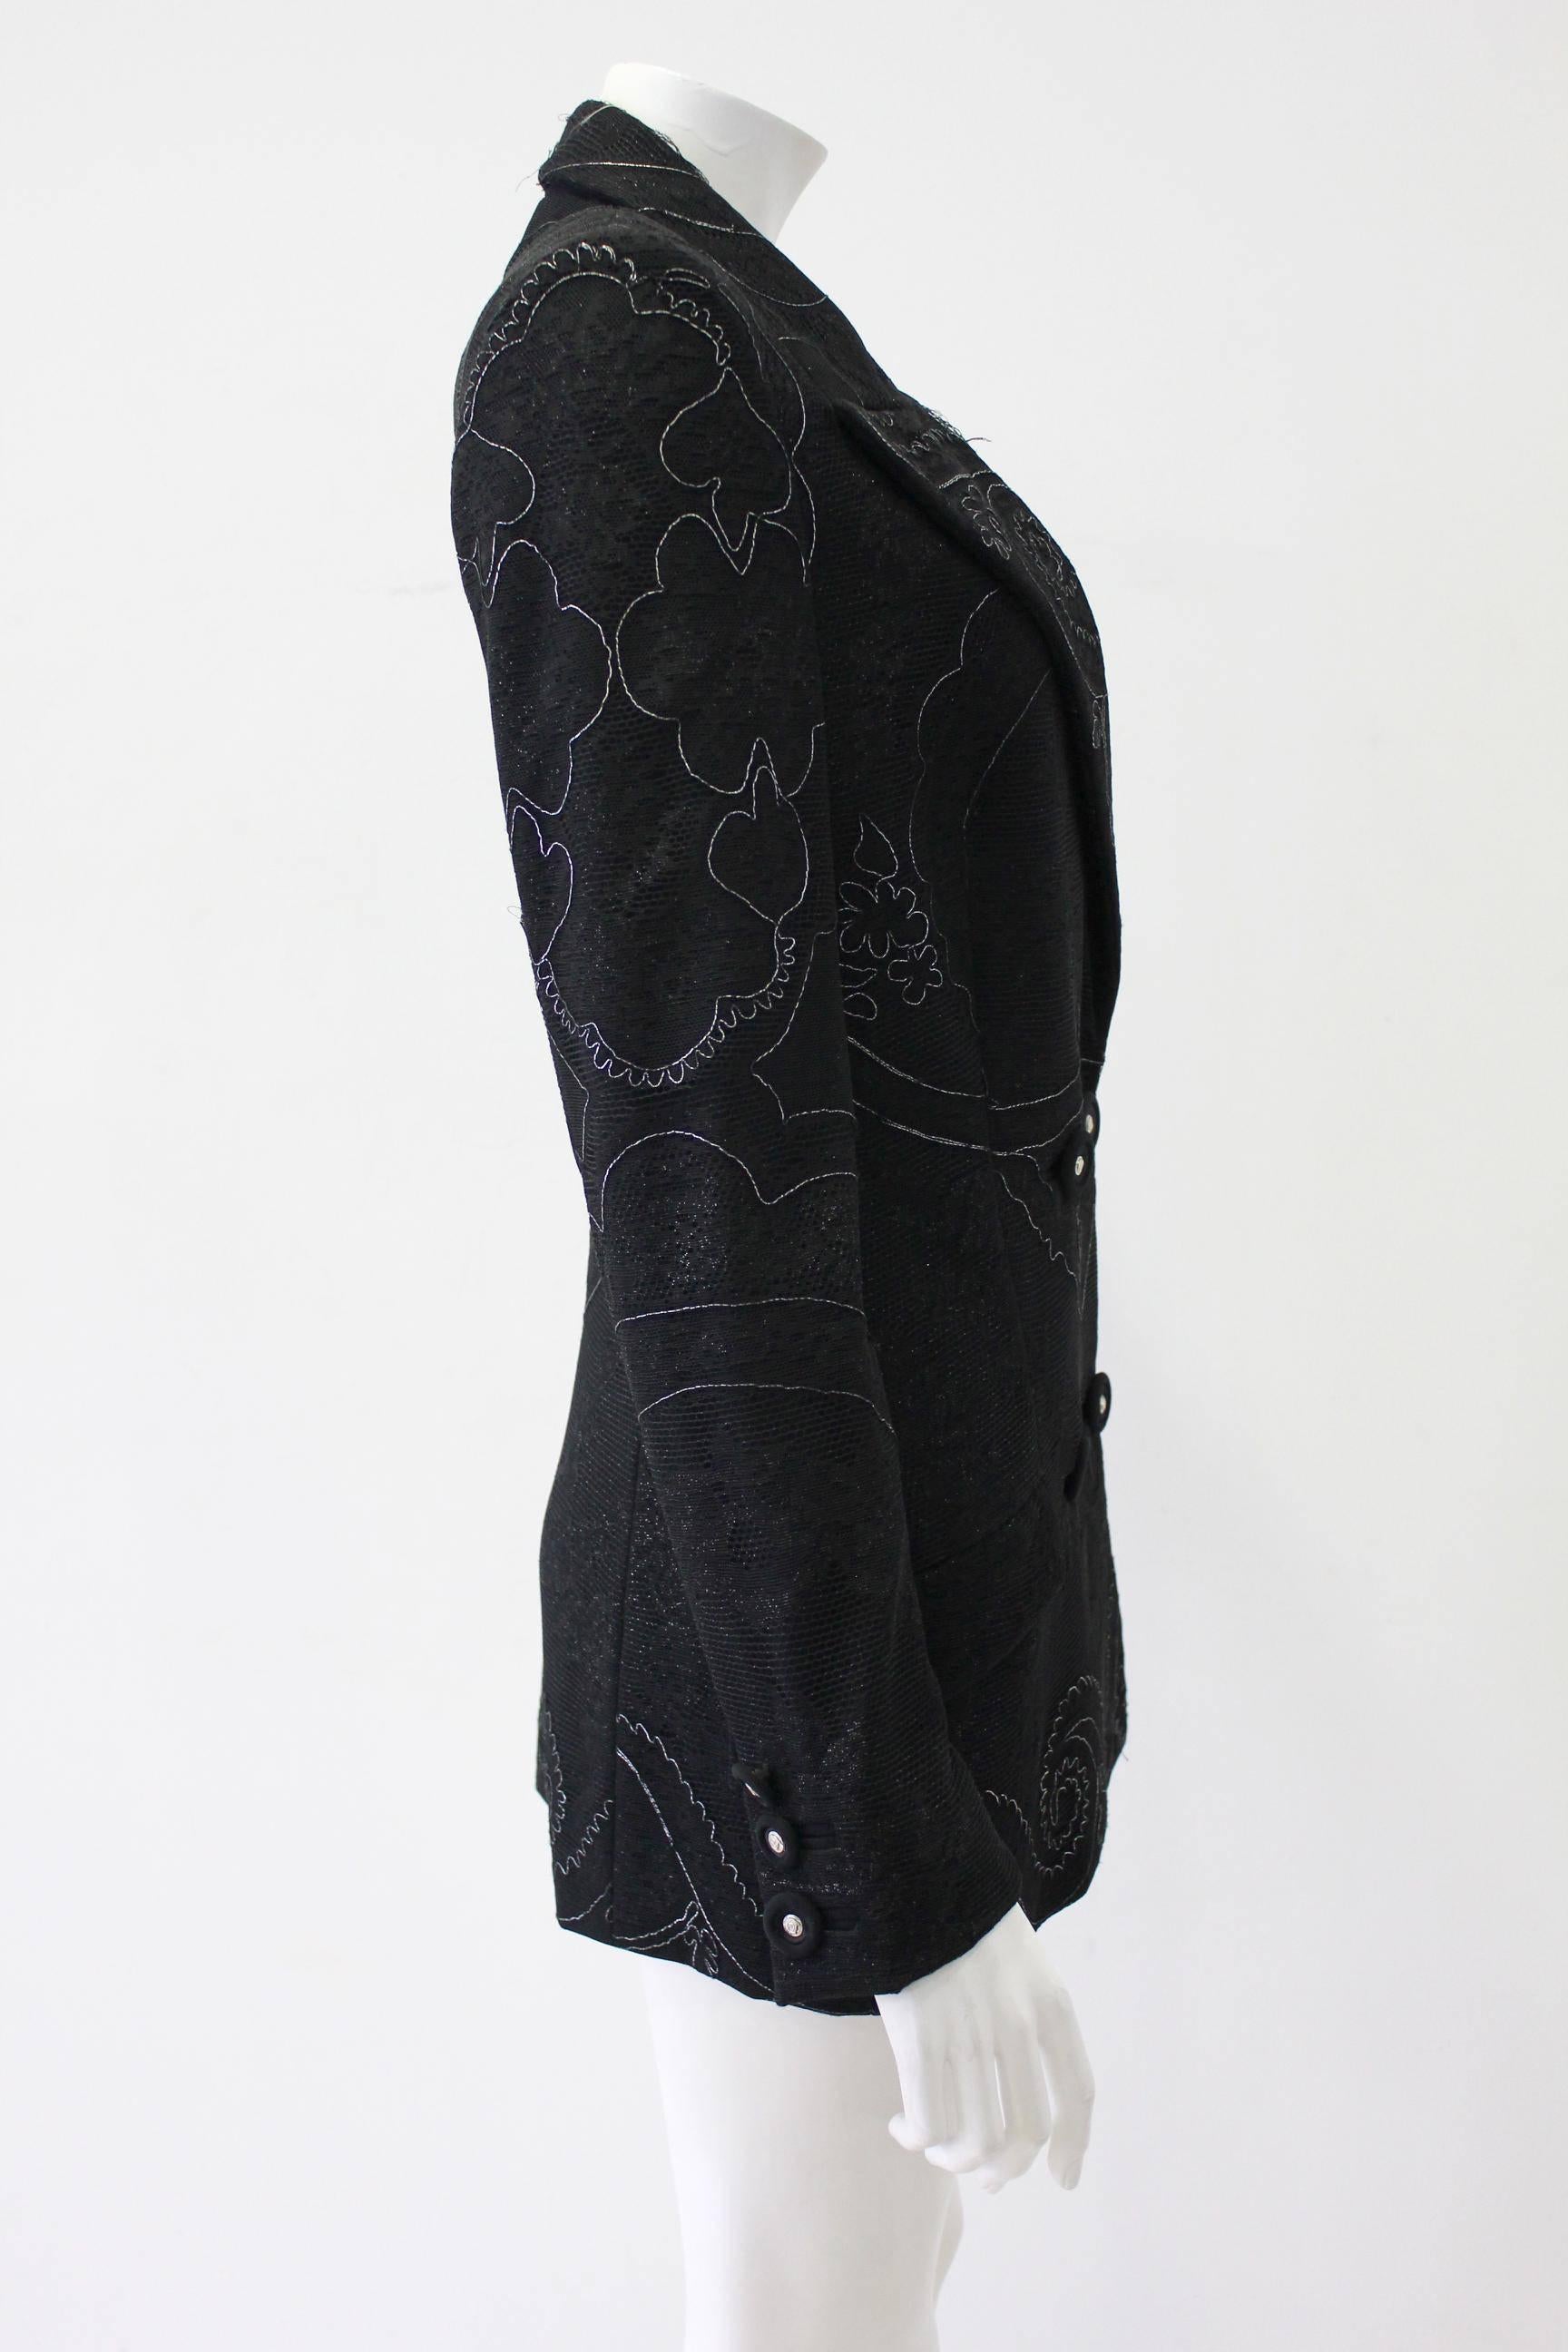 Black Gianni Versace Couture Lace Metallic Embroidered Jacket Fall 1996 For Sale